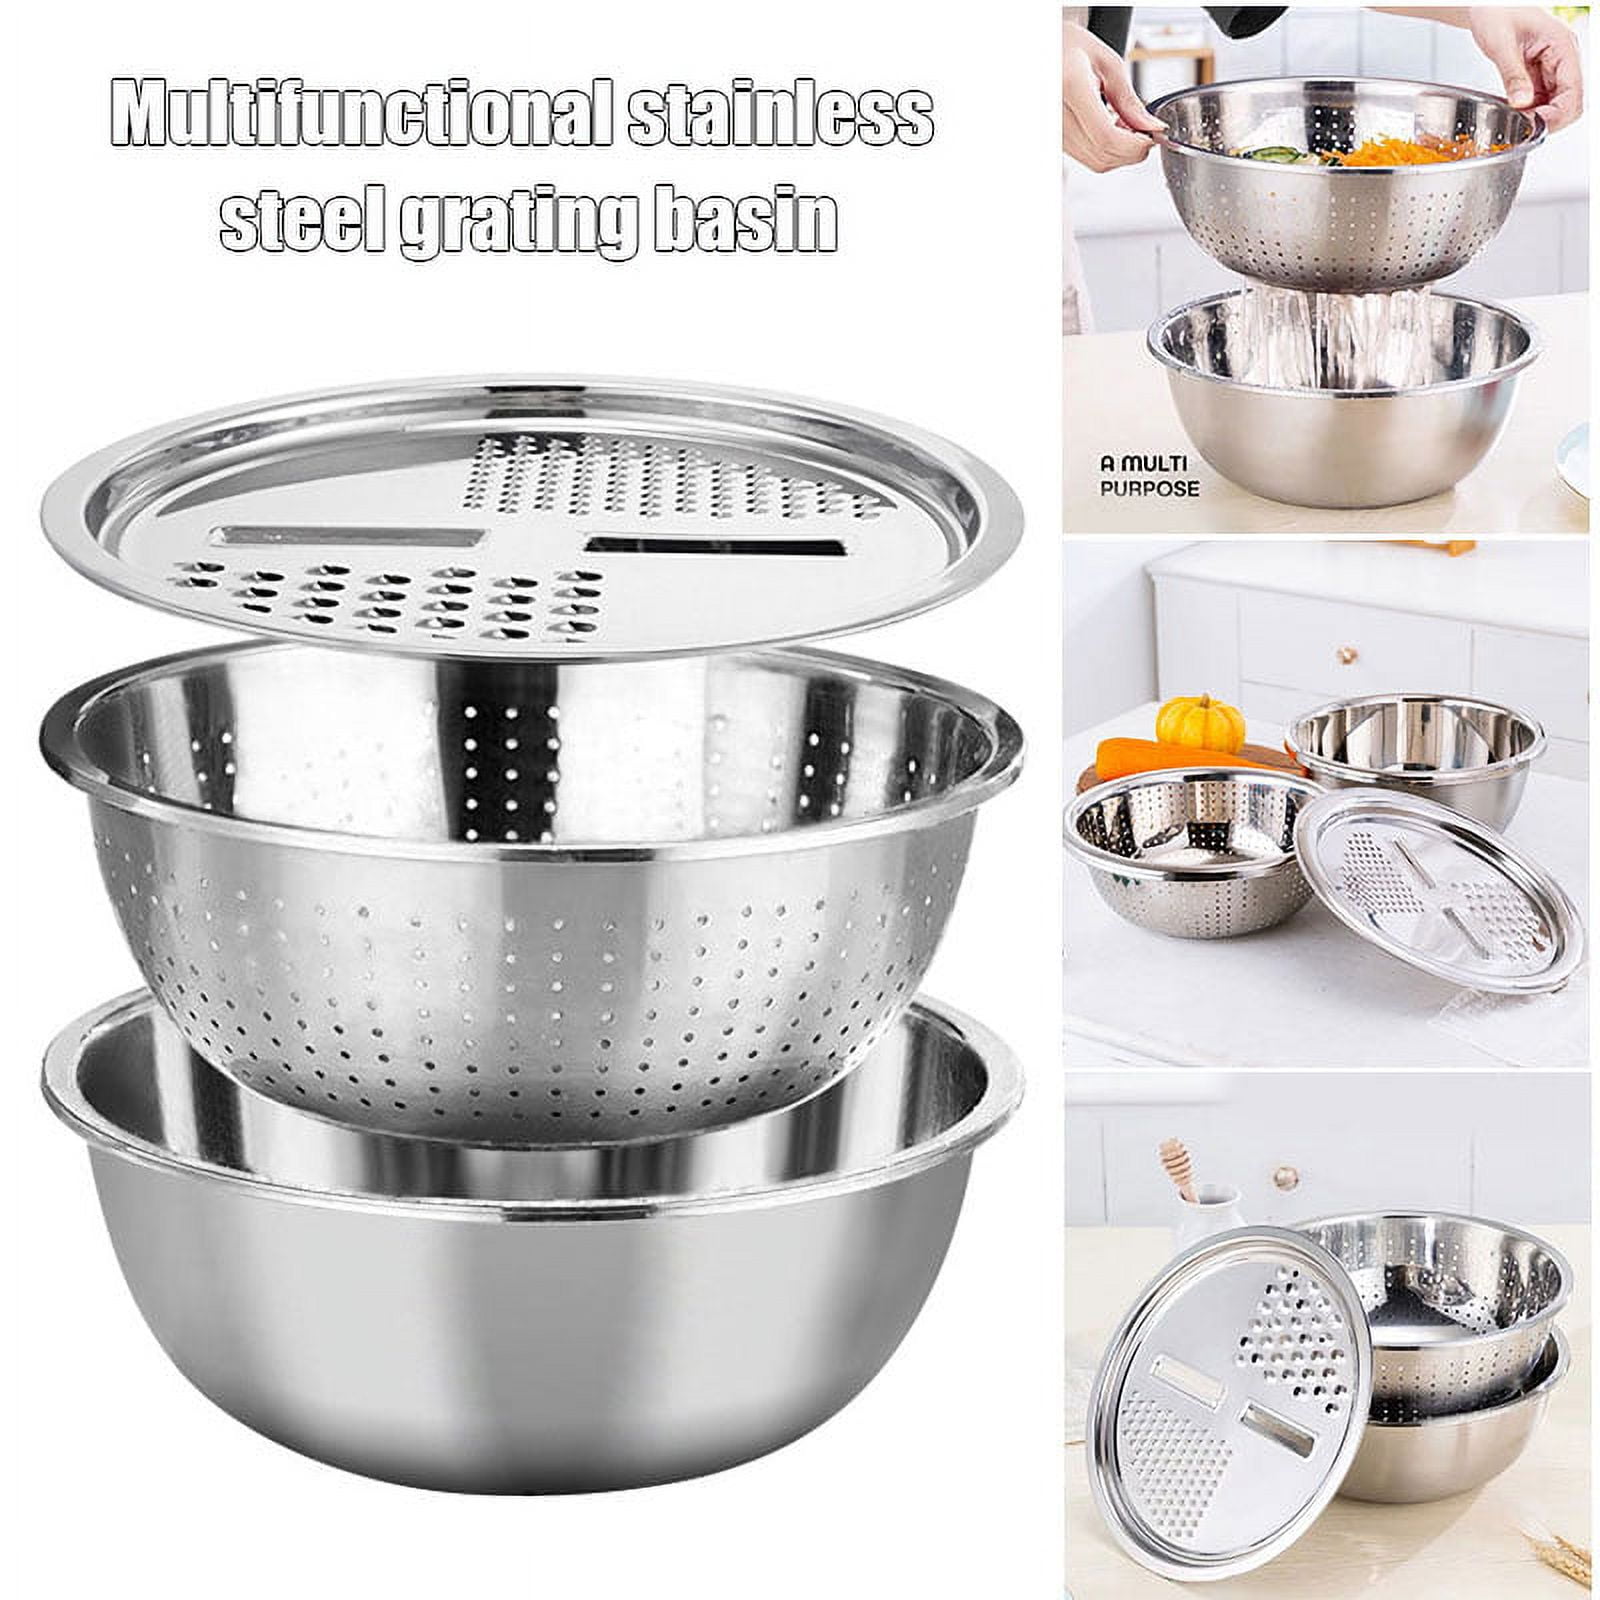 1set/9pcs vegetable cutter with drainage basket, multifunctional